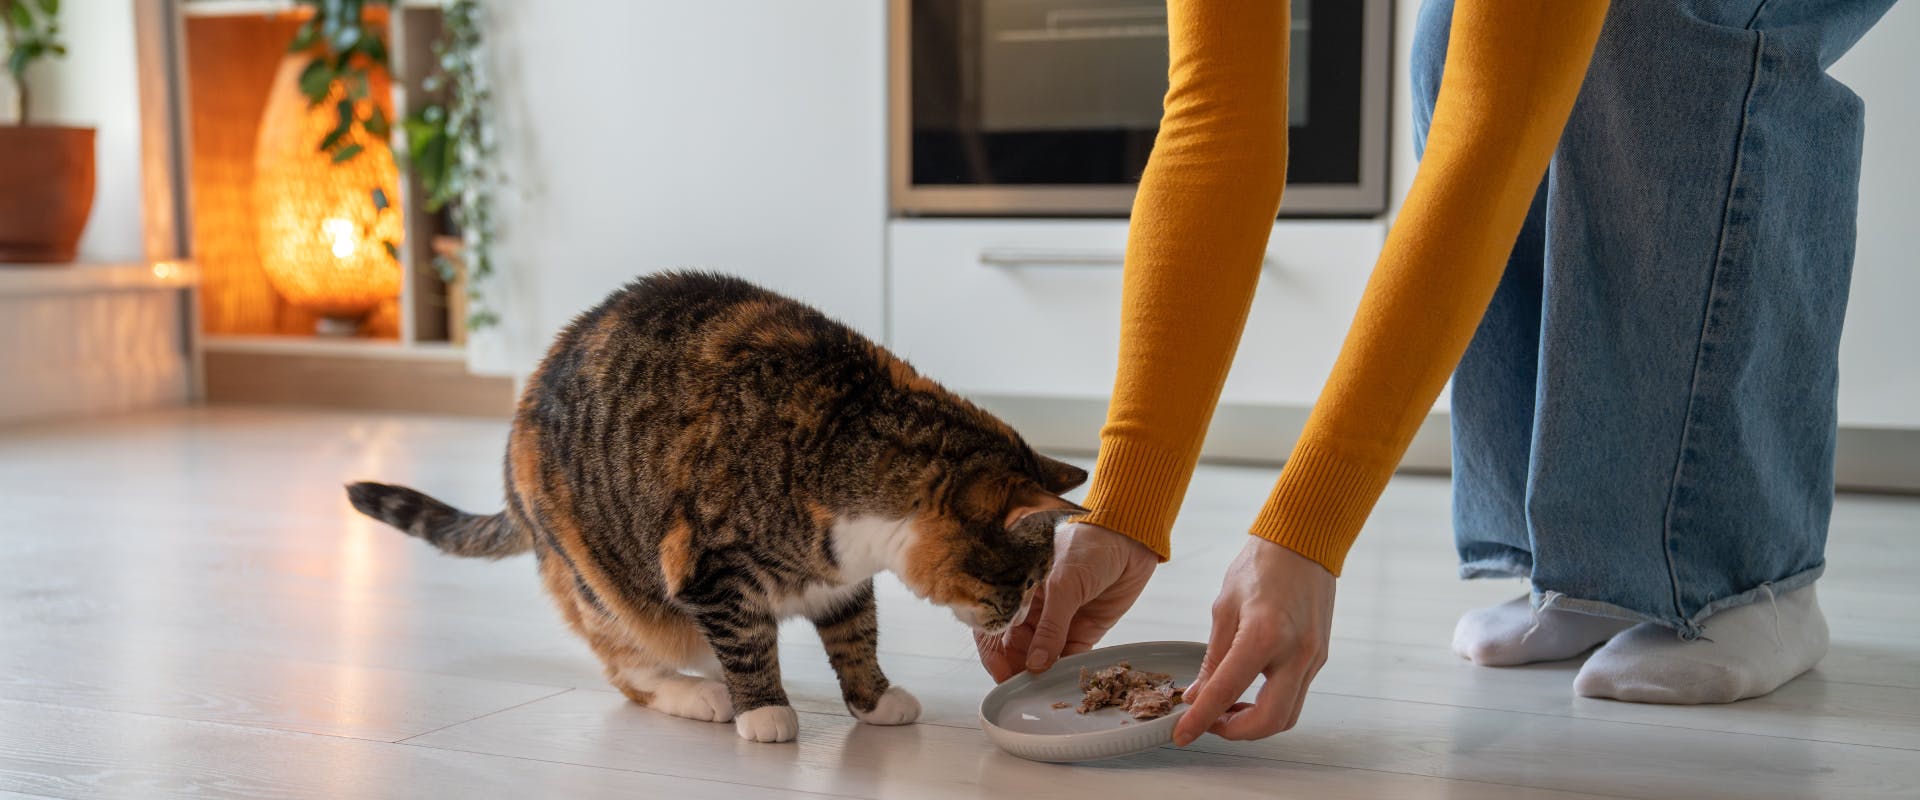 a short-haired calico cat indoor being presented with a saucer of cat food